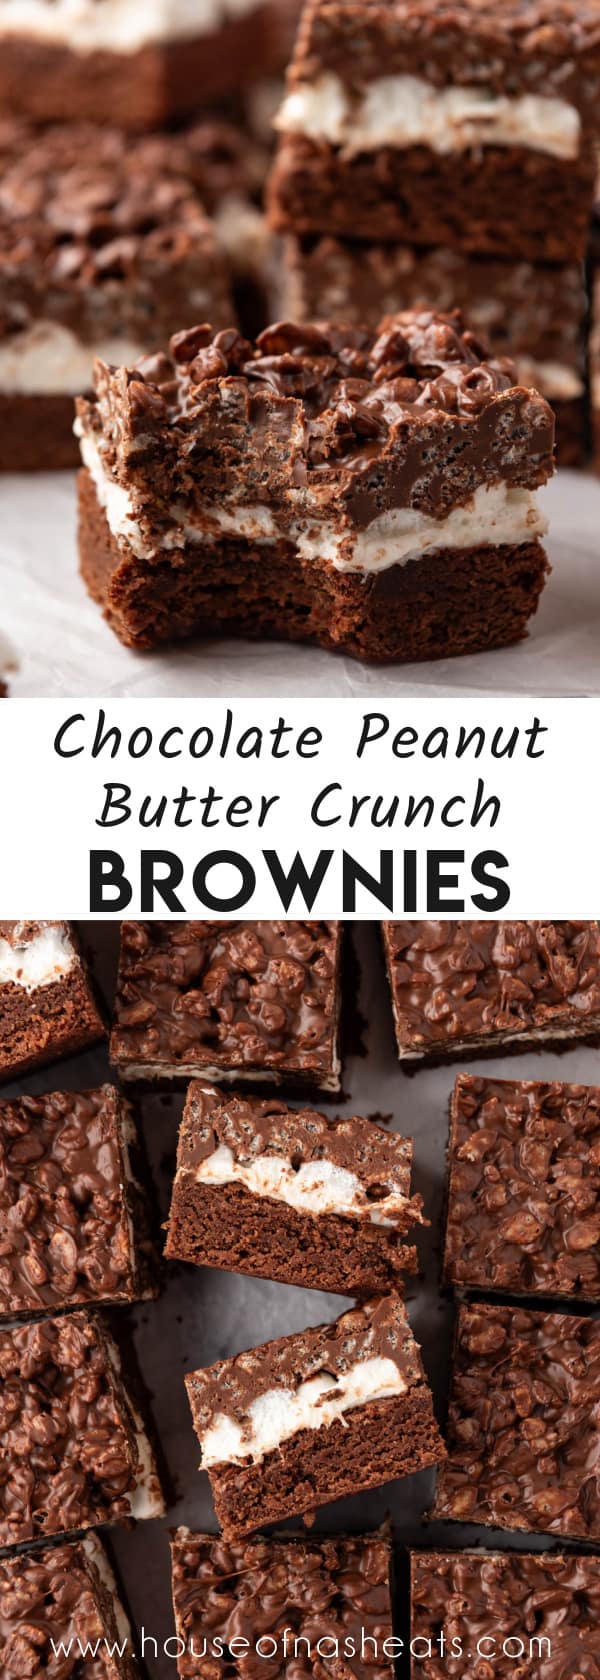 A collage of images of chocolate peanut butter crunch brownies with text overlay.